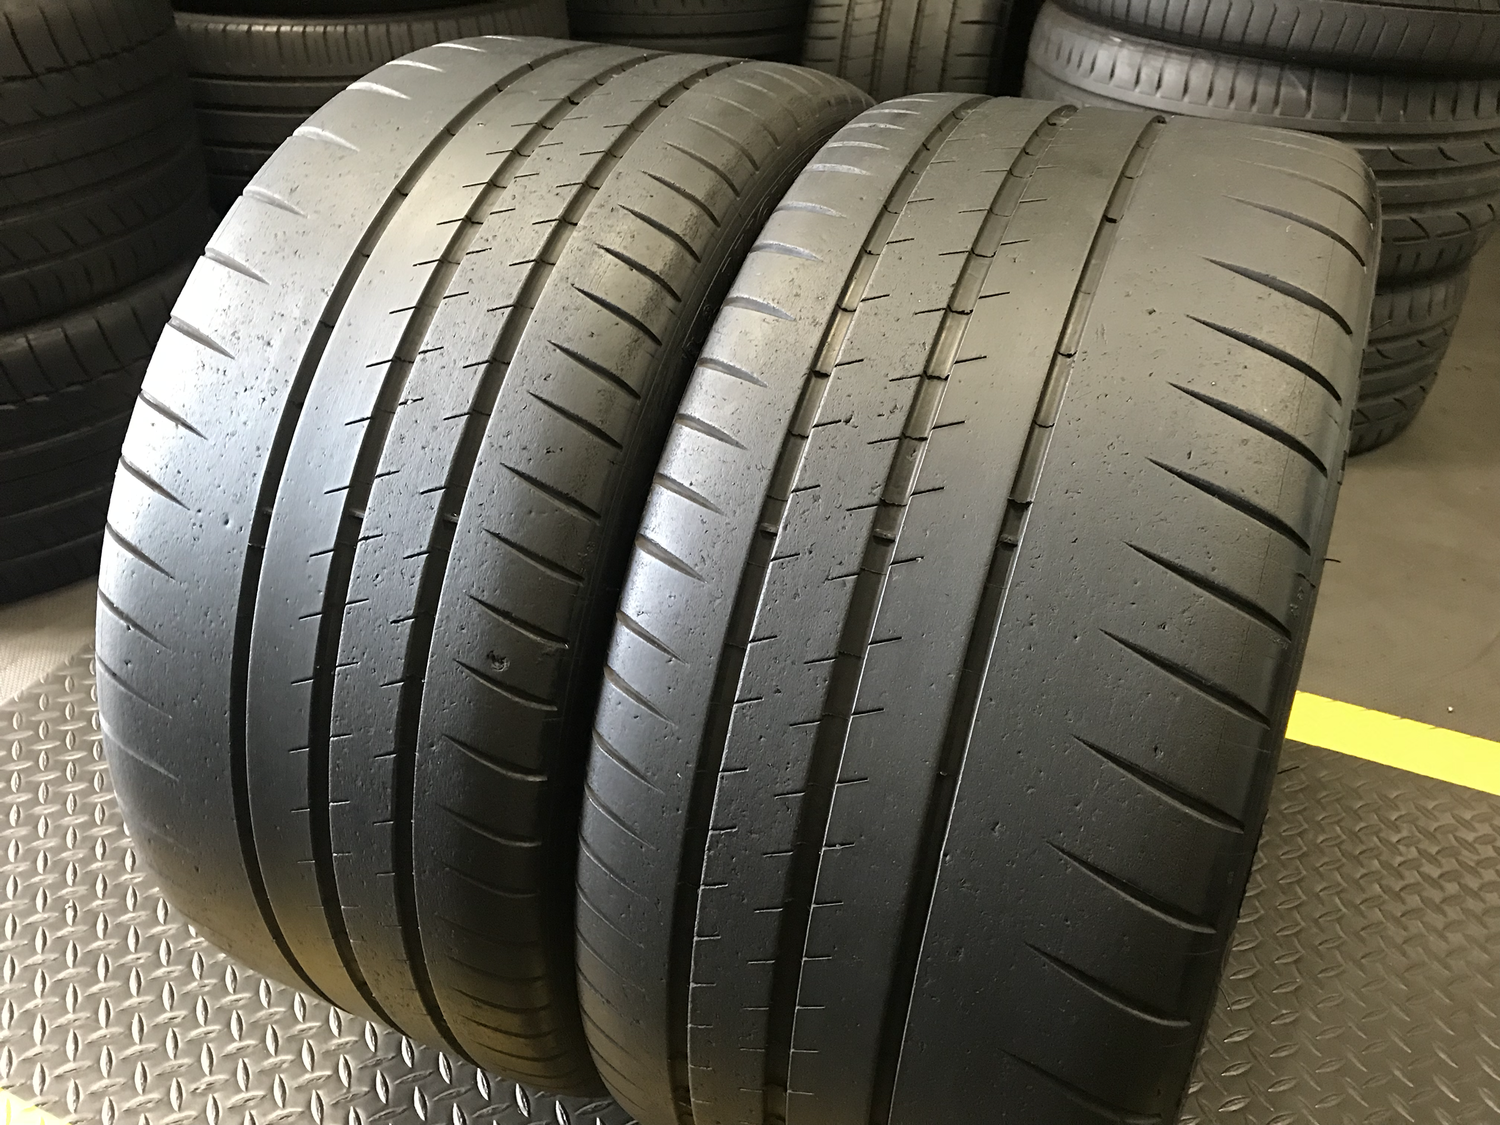 Michelin Pilot Sport Cup 2 Store - anuariocidob.org 1690052111